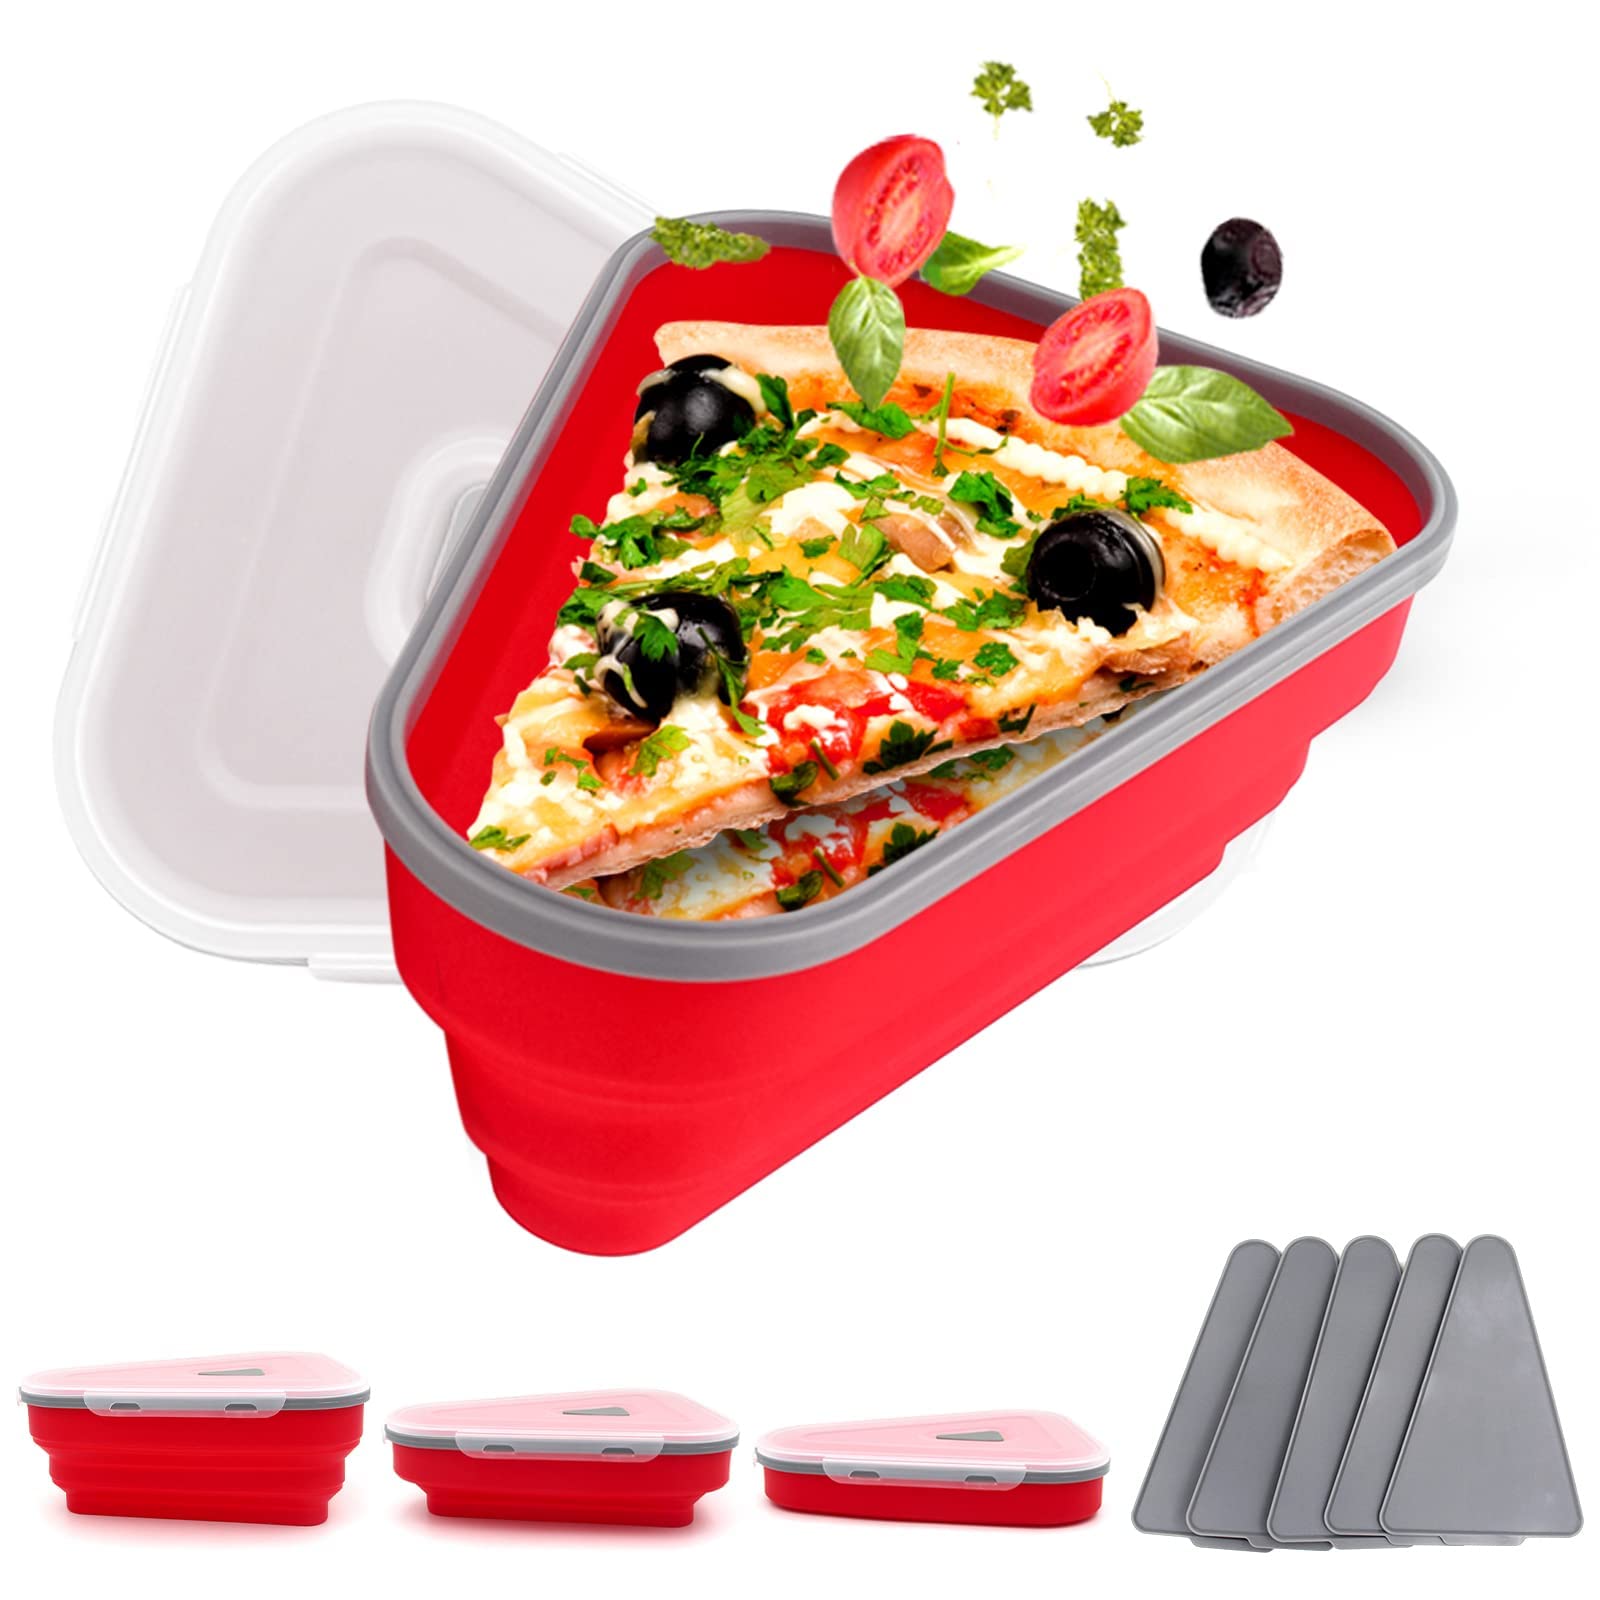 bkkbt Collapsable Pizza Storage Container - Reusable Pizza Box with 5 Microwaveable Serving Trays, Pizza Leftover Container Storage Space Saver, Microwave and Dishwasher Safe